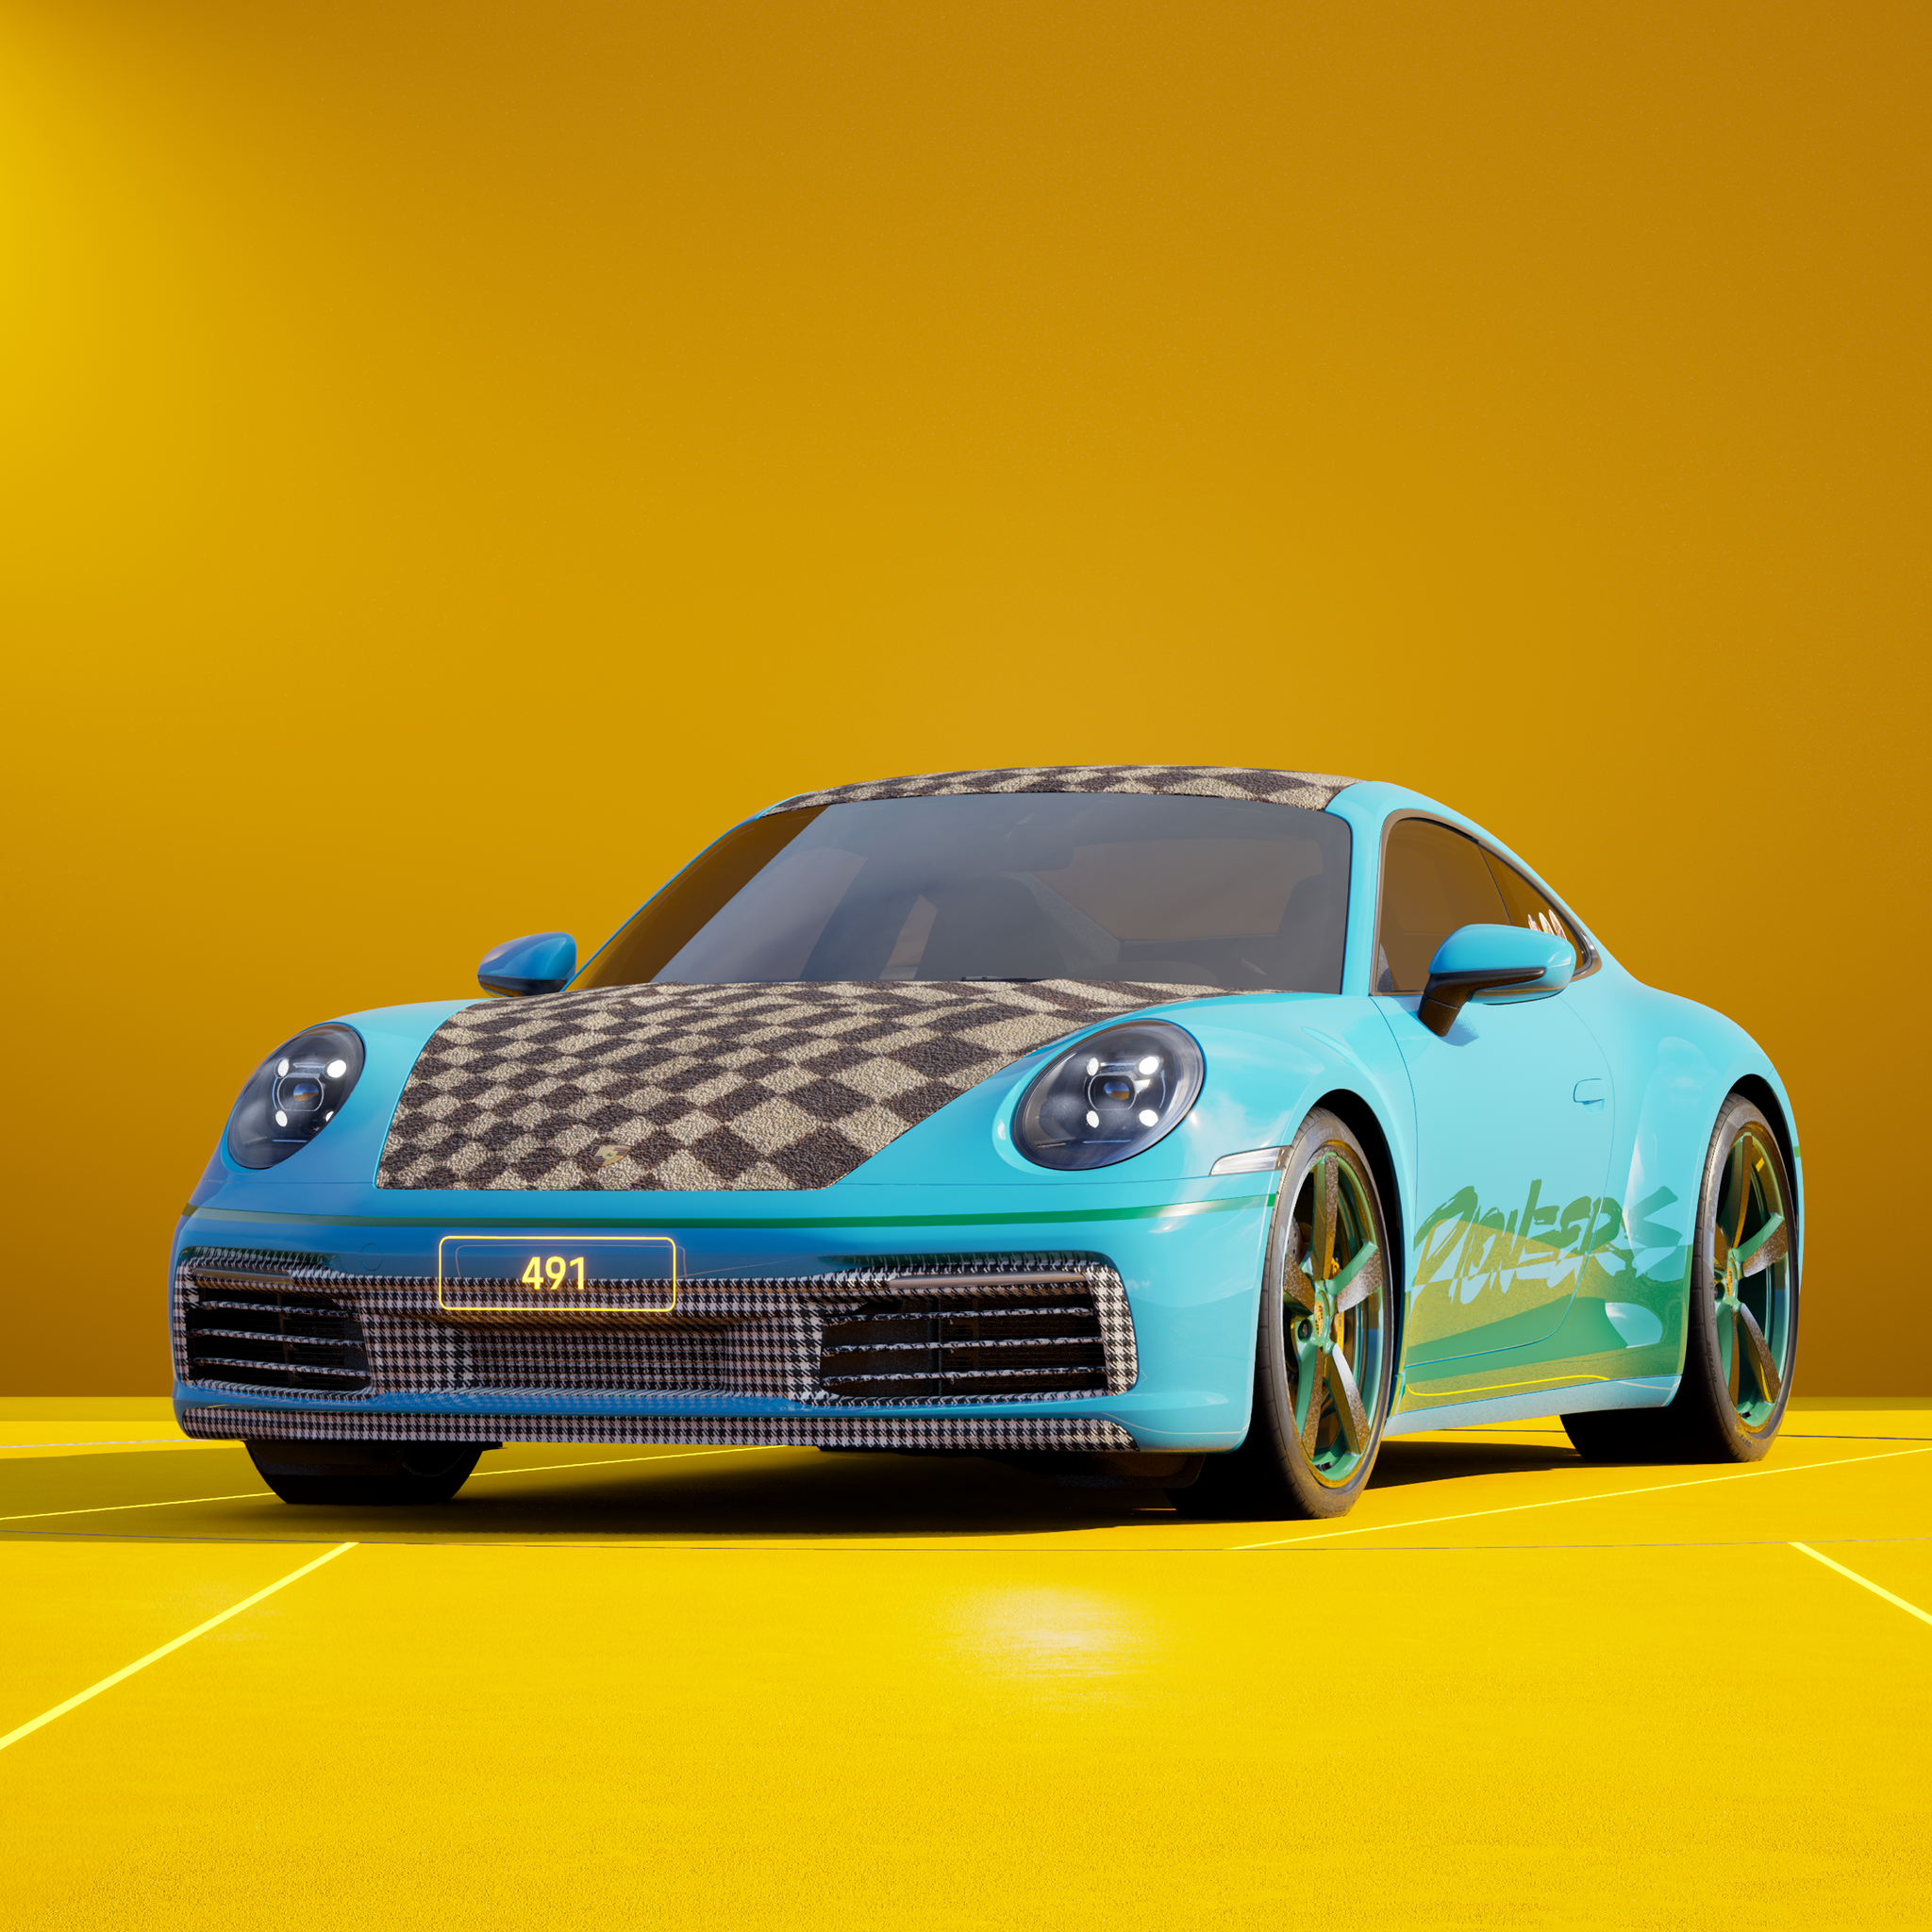 The PORSCHΞ 911 491 image in phase